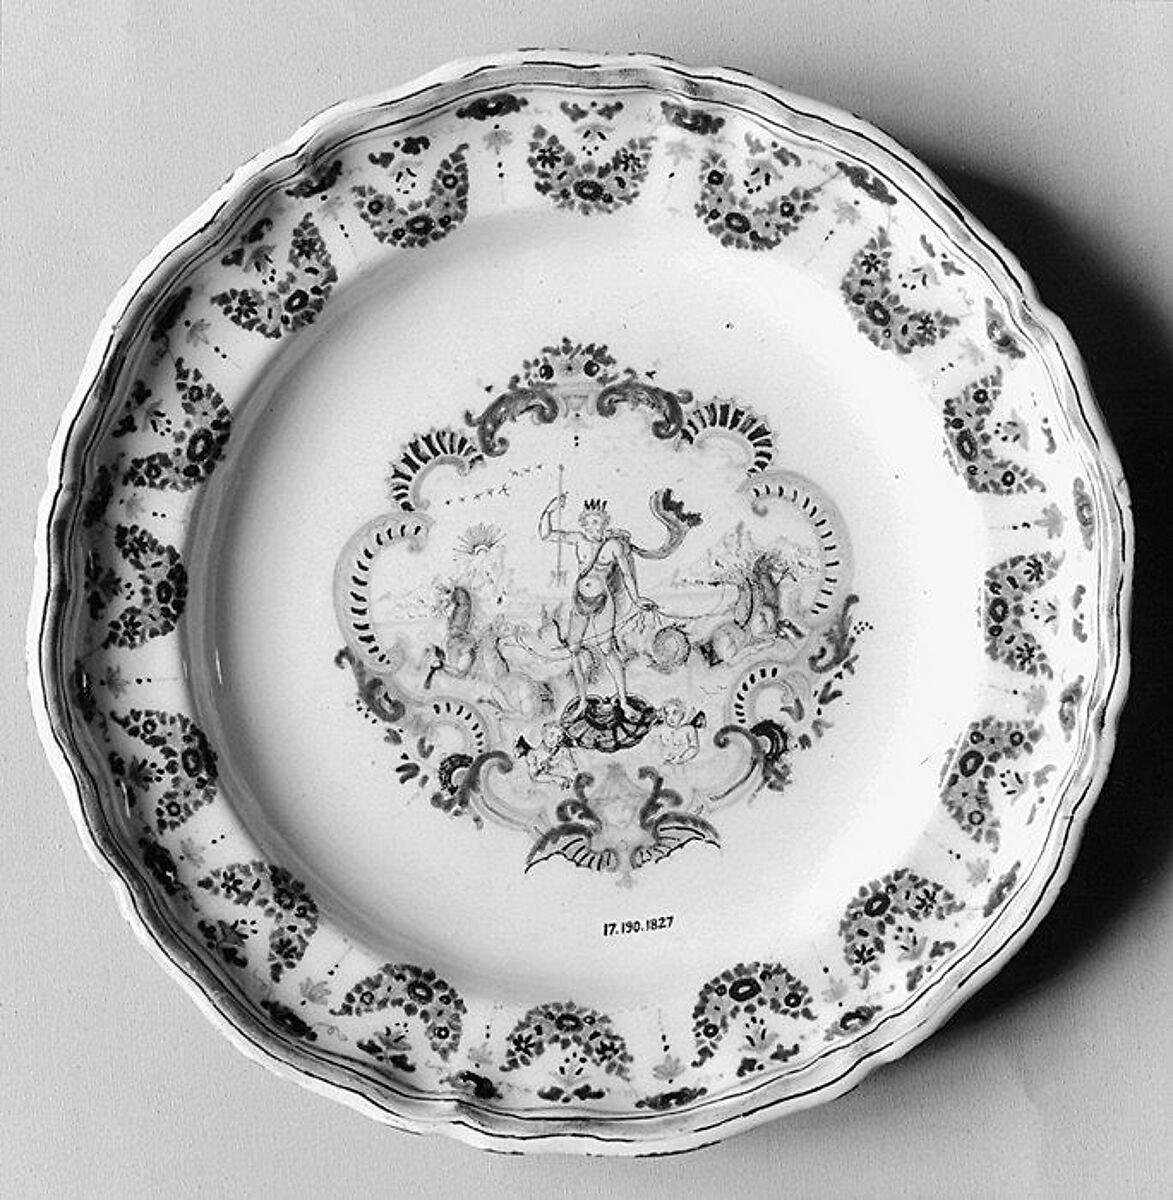 Plate or tray, Olérys Factory (French, established Moustiers, 1738), Faience (tin-glazed earthenware), French, Moustiers 